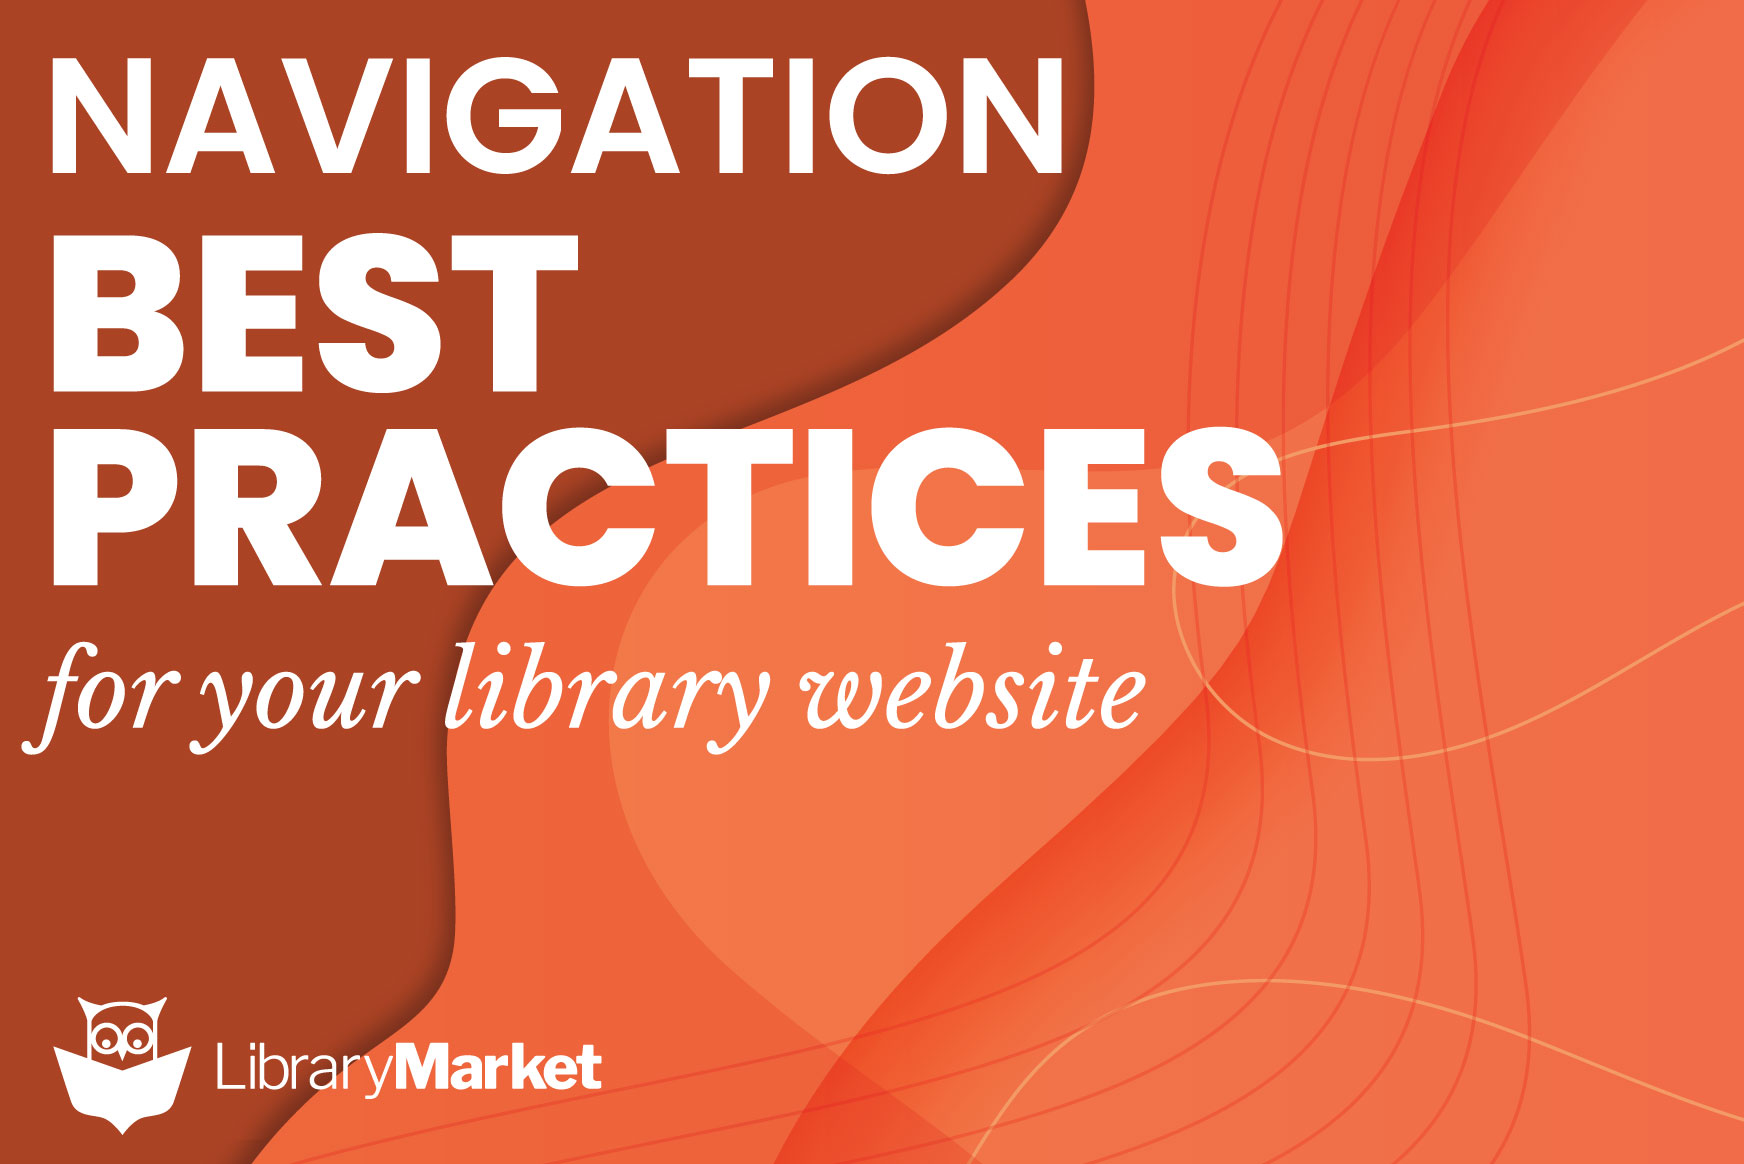 Navigation Best Practices for Your Library Website